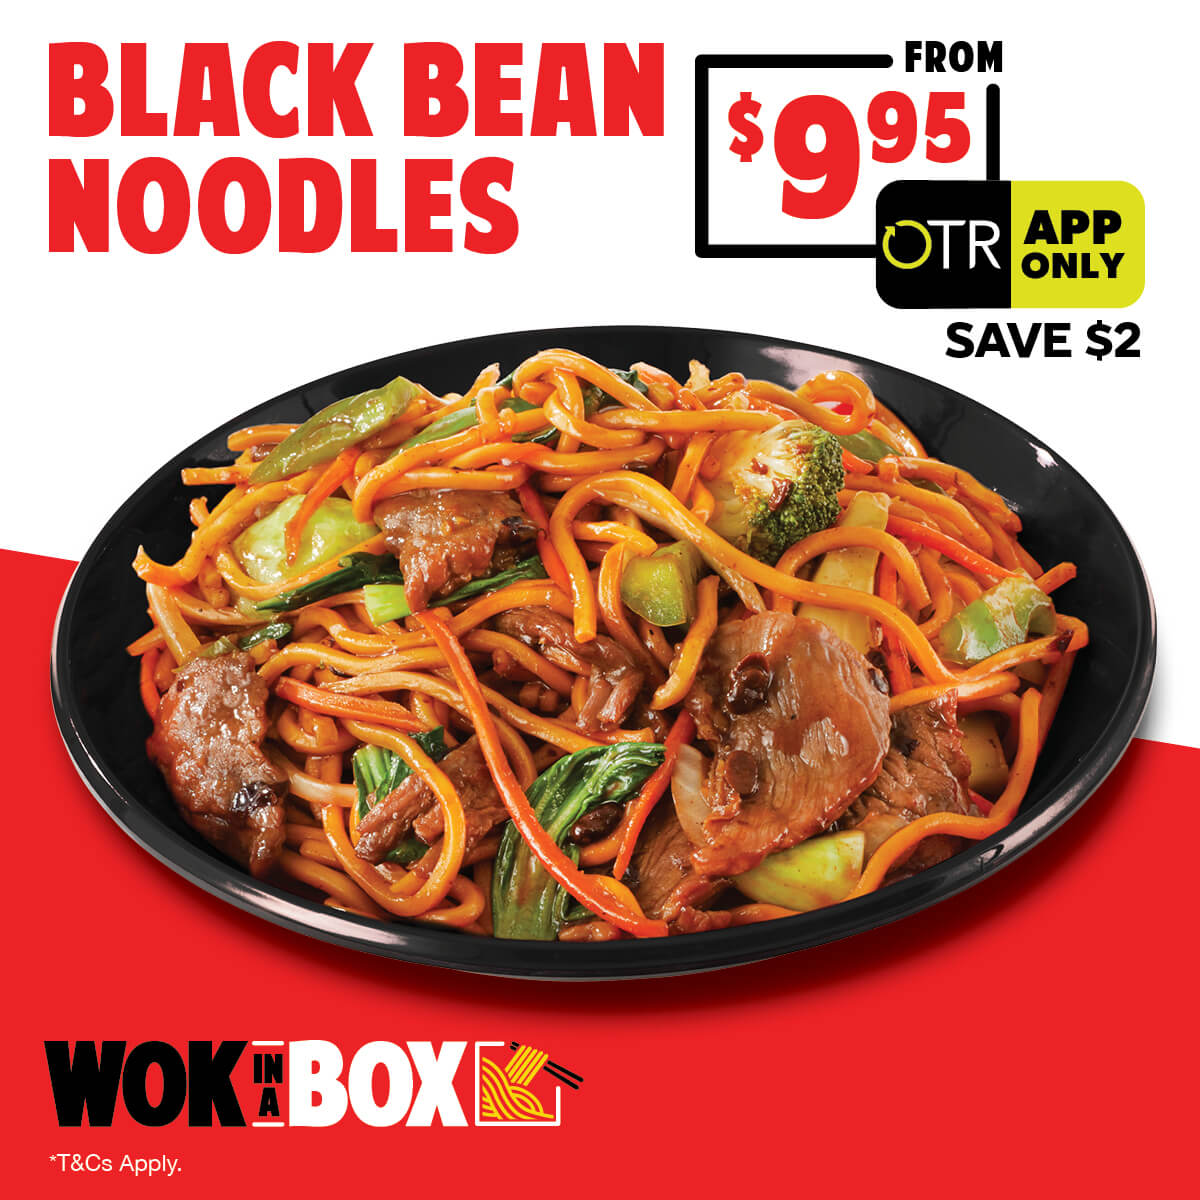 Black Bean Beef Noodles from $9.95